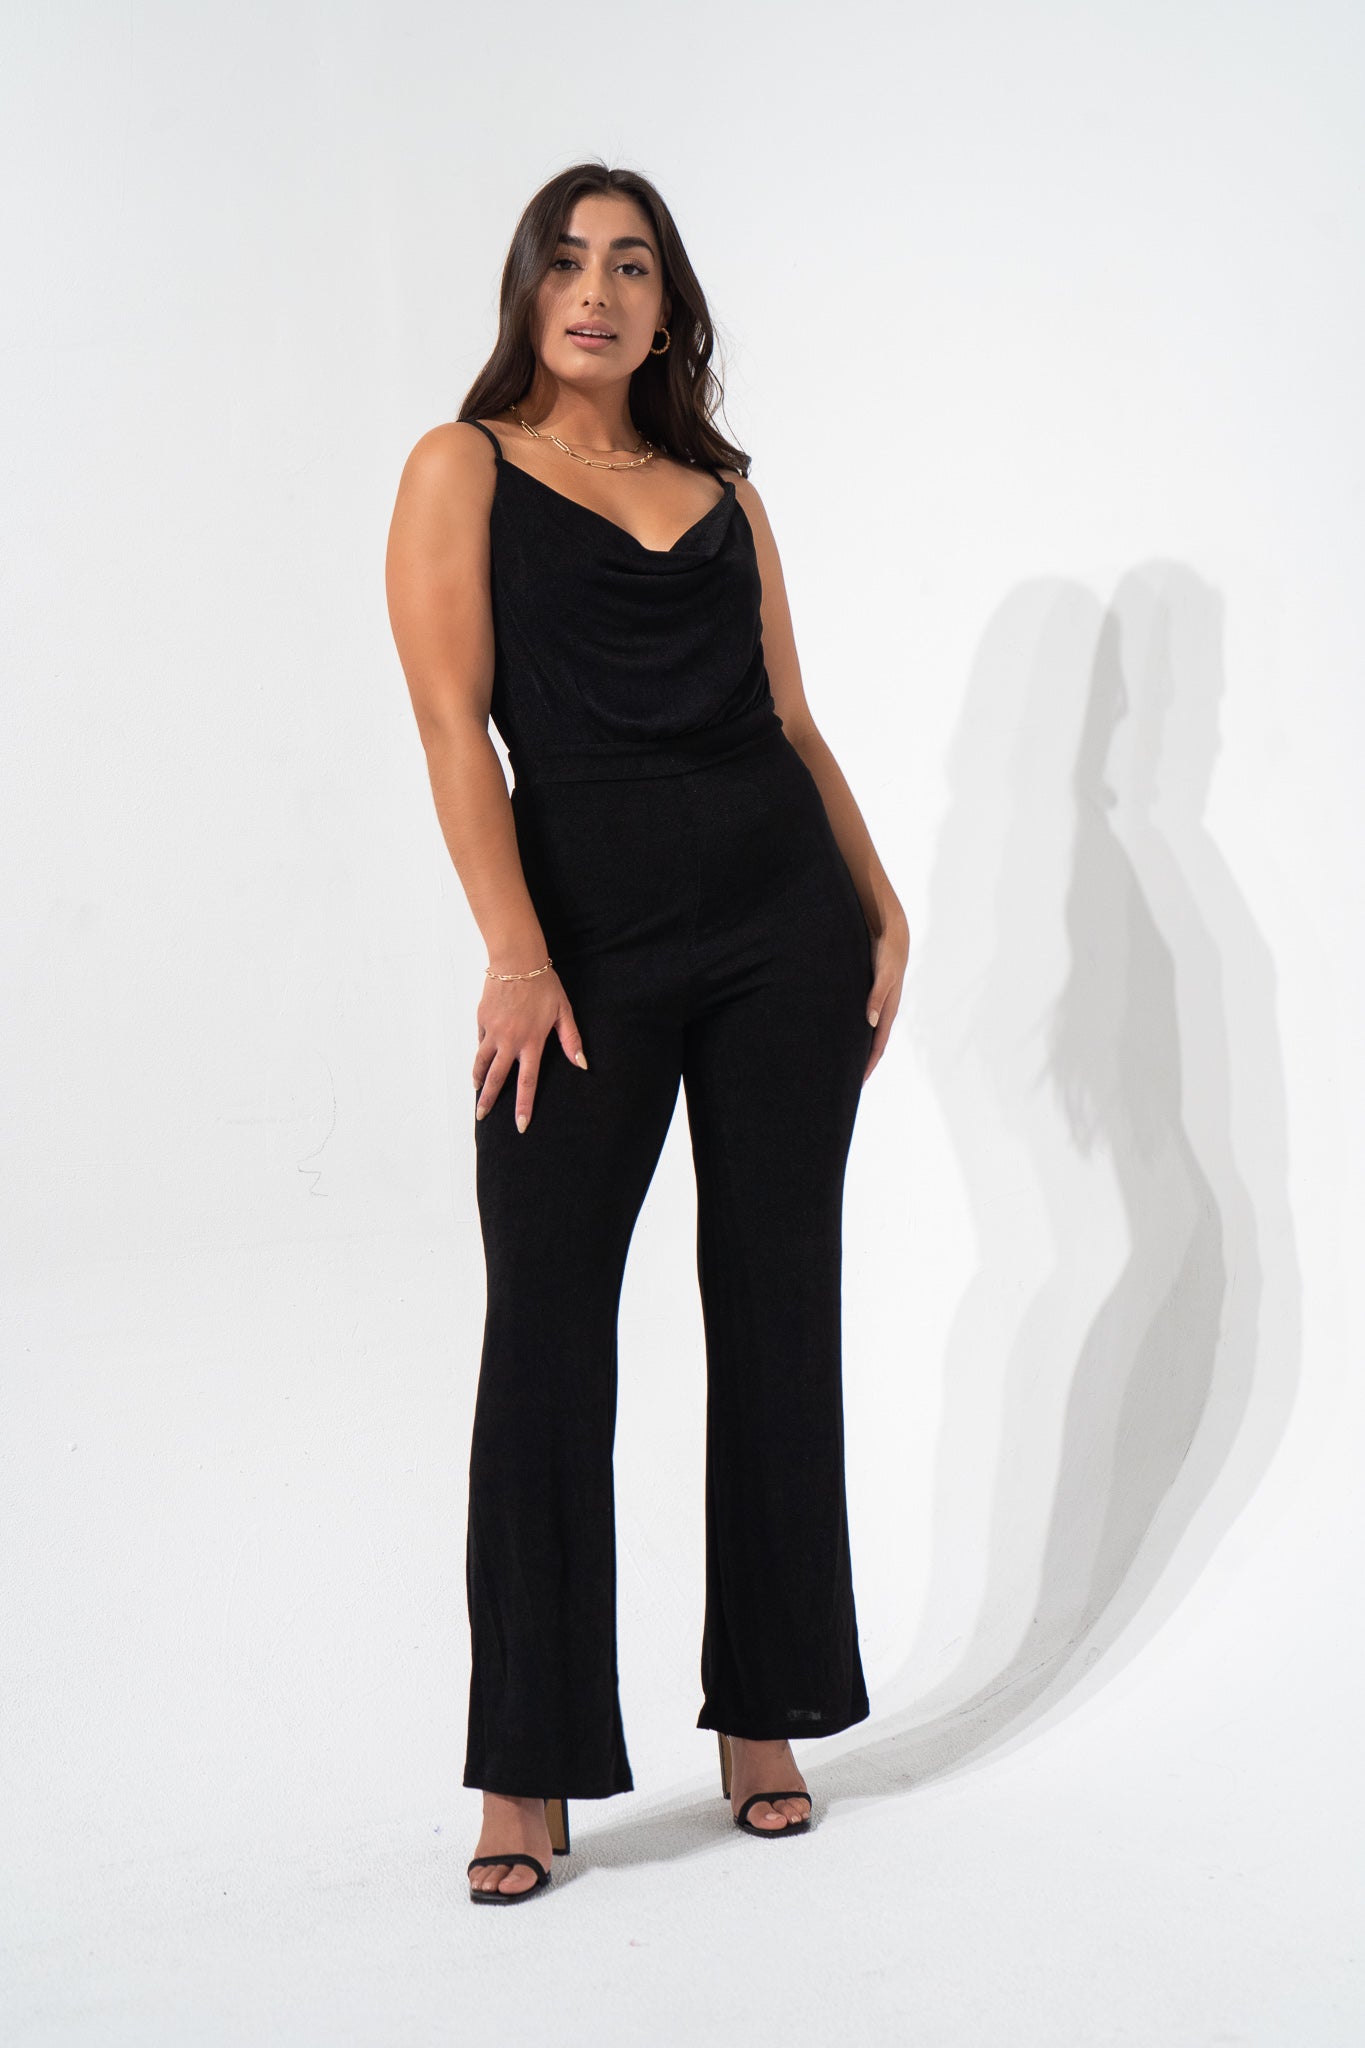 A true classic wardrobe staple. The Whiskey Neat Jumpsuit features a waistband that hugs the waist and shapes the mid-section, a cowl neck for a flattering neckline, thin adjustable straps and made from luxury slinky fabric that flows with your movement. Structured fit but made for comfort. 